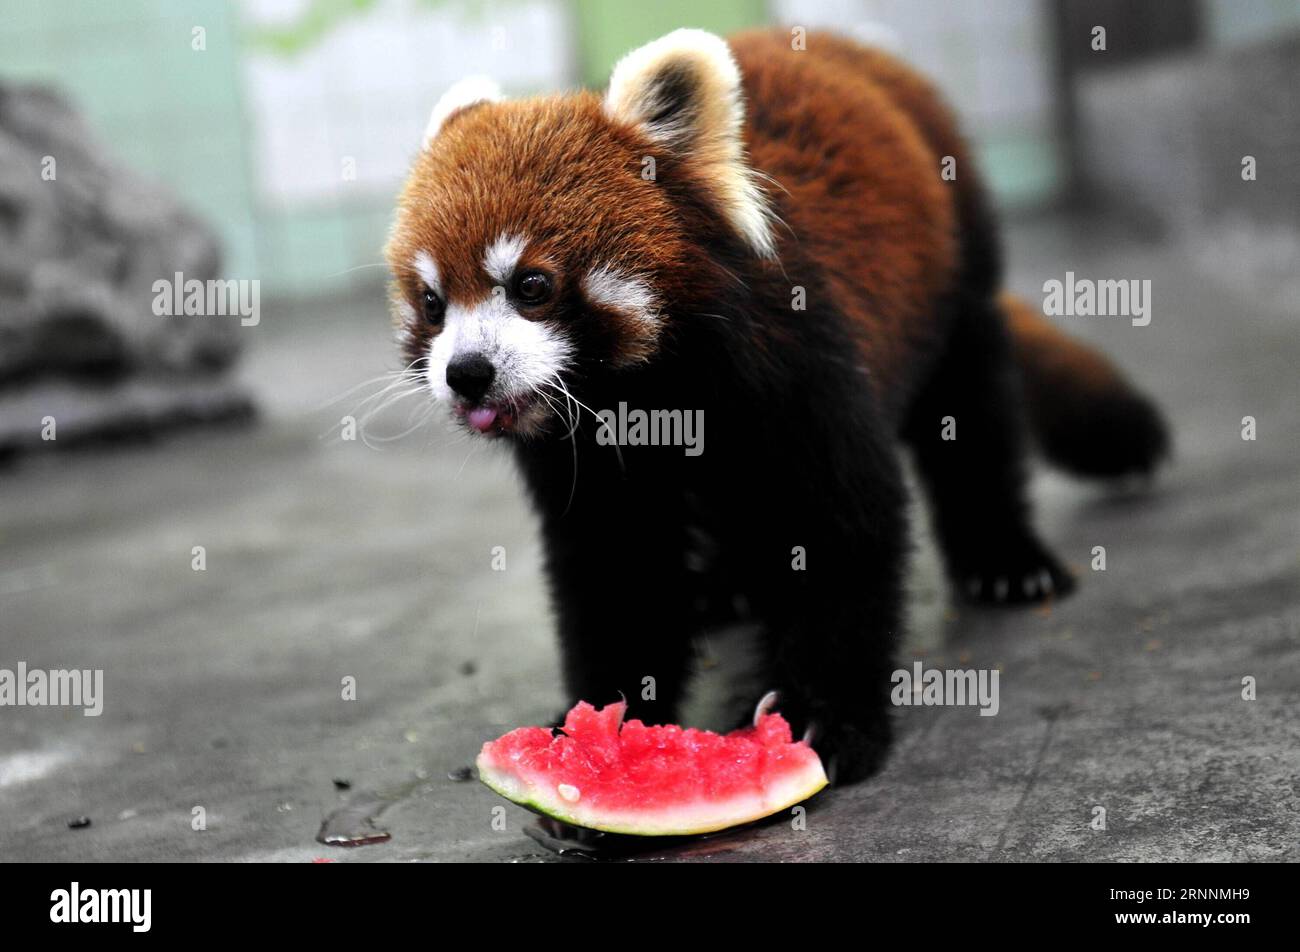 (170721) -- SHANGHAI, July 21, 2017 -- A lesser panda eats watermelon at Shanghai Zoo in east China s Shanghai, July 21, 2017. The meteorological department of east China metropolis Shanghai recorded an air temperature of 40.9 degrees Celsius (105.6 degrees Fahrenheit) at around 2 p.m. Friday, the highest on record in the city in 145 years. The Shanghai Zoo has took many measures to keep the animals cool. ) (lb) CHINA-SHANGHAI-ANIMAL-SUMMER HEAT (CN) ZhangxJiansong PUBLICATIONxNOTxINxCHN   Shanghai July 21 2017 a Lesser Panda eats Watermelon AT Shanghai Zoo in East China S Shanghai July 21 201 Stock Photo